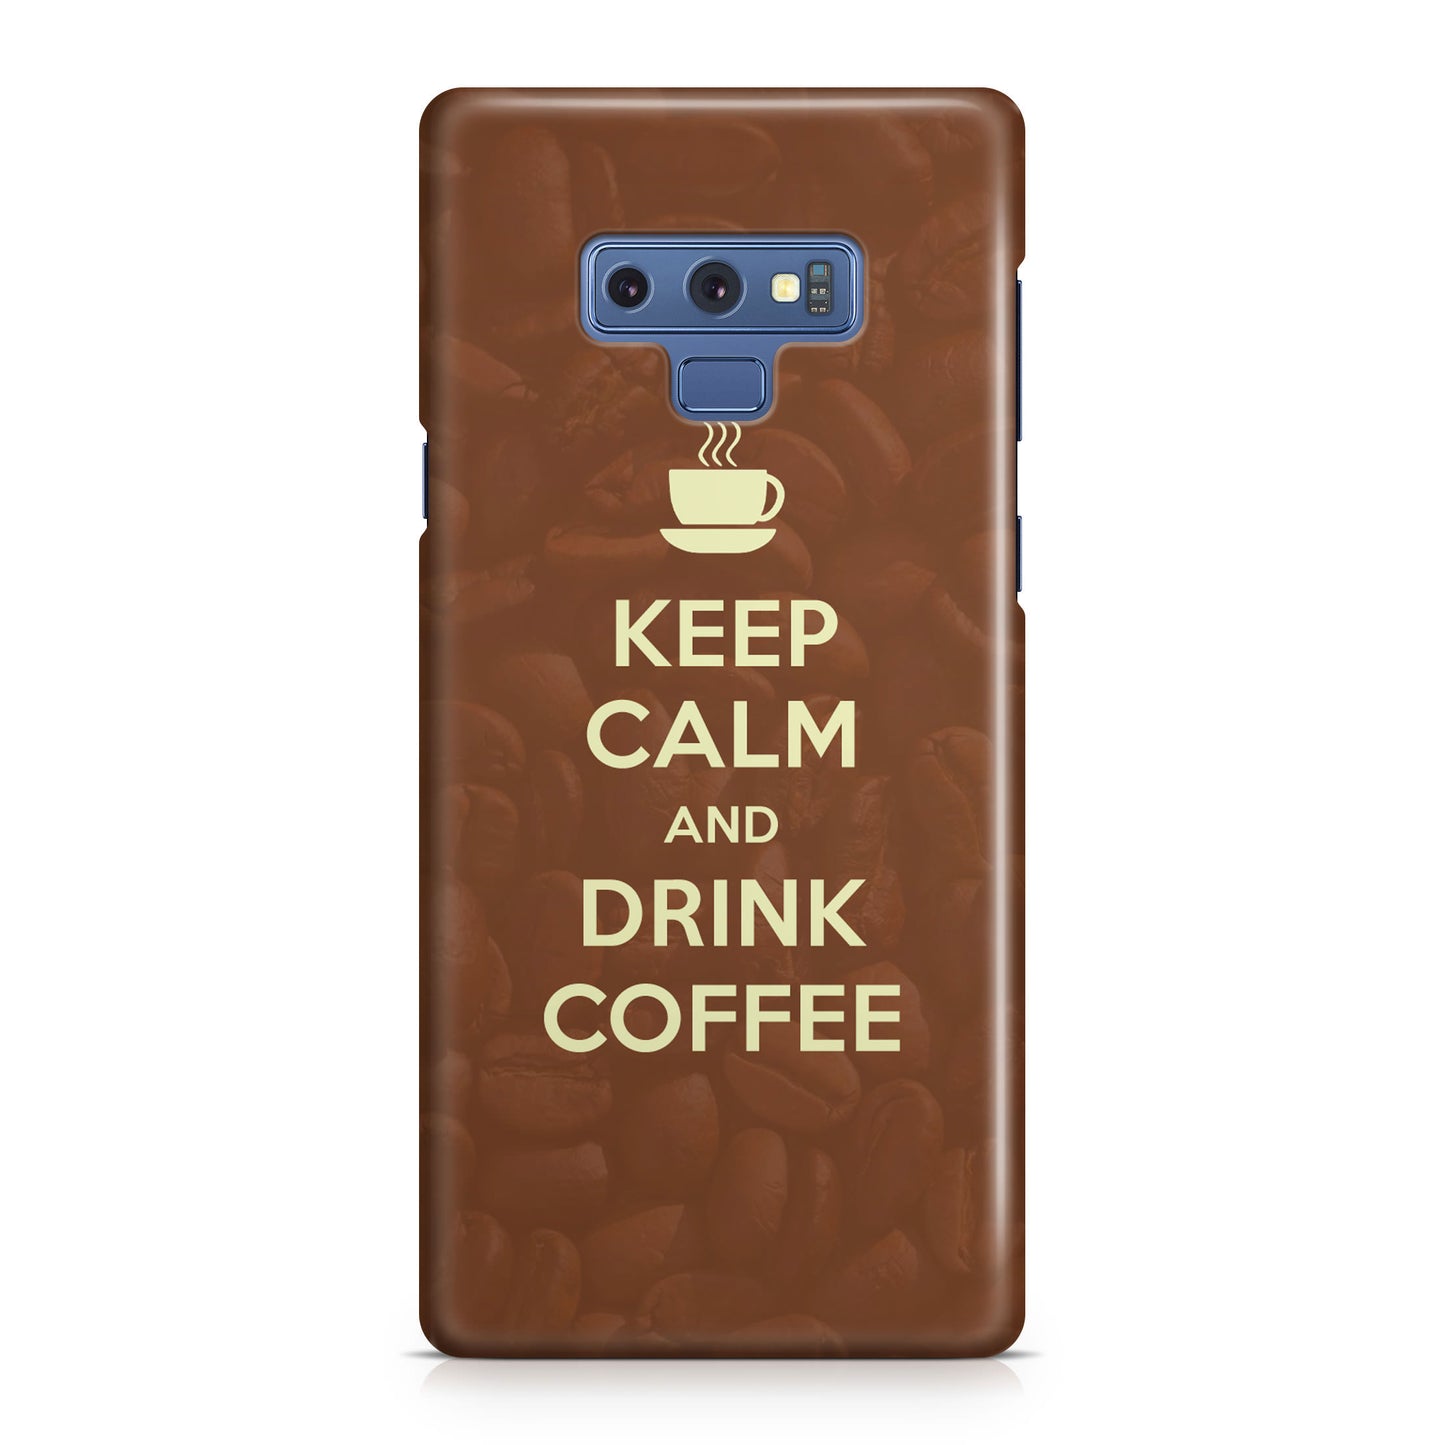 Keep Calm and Drink Coffee Galaxy Note 9 Case